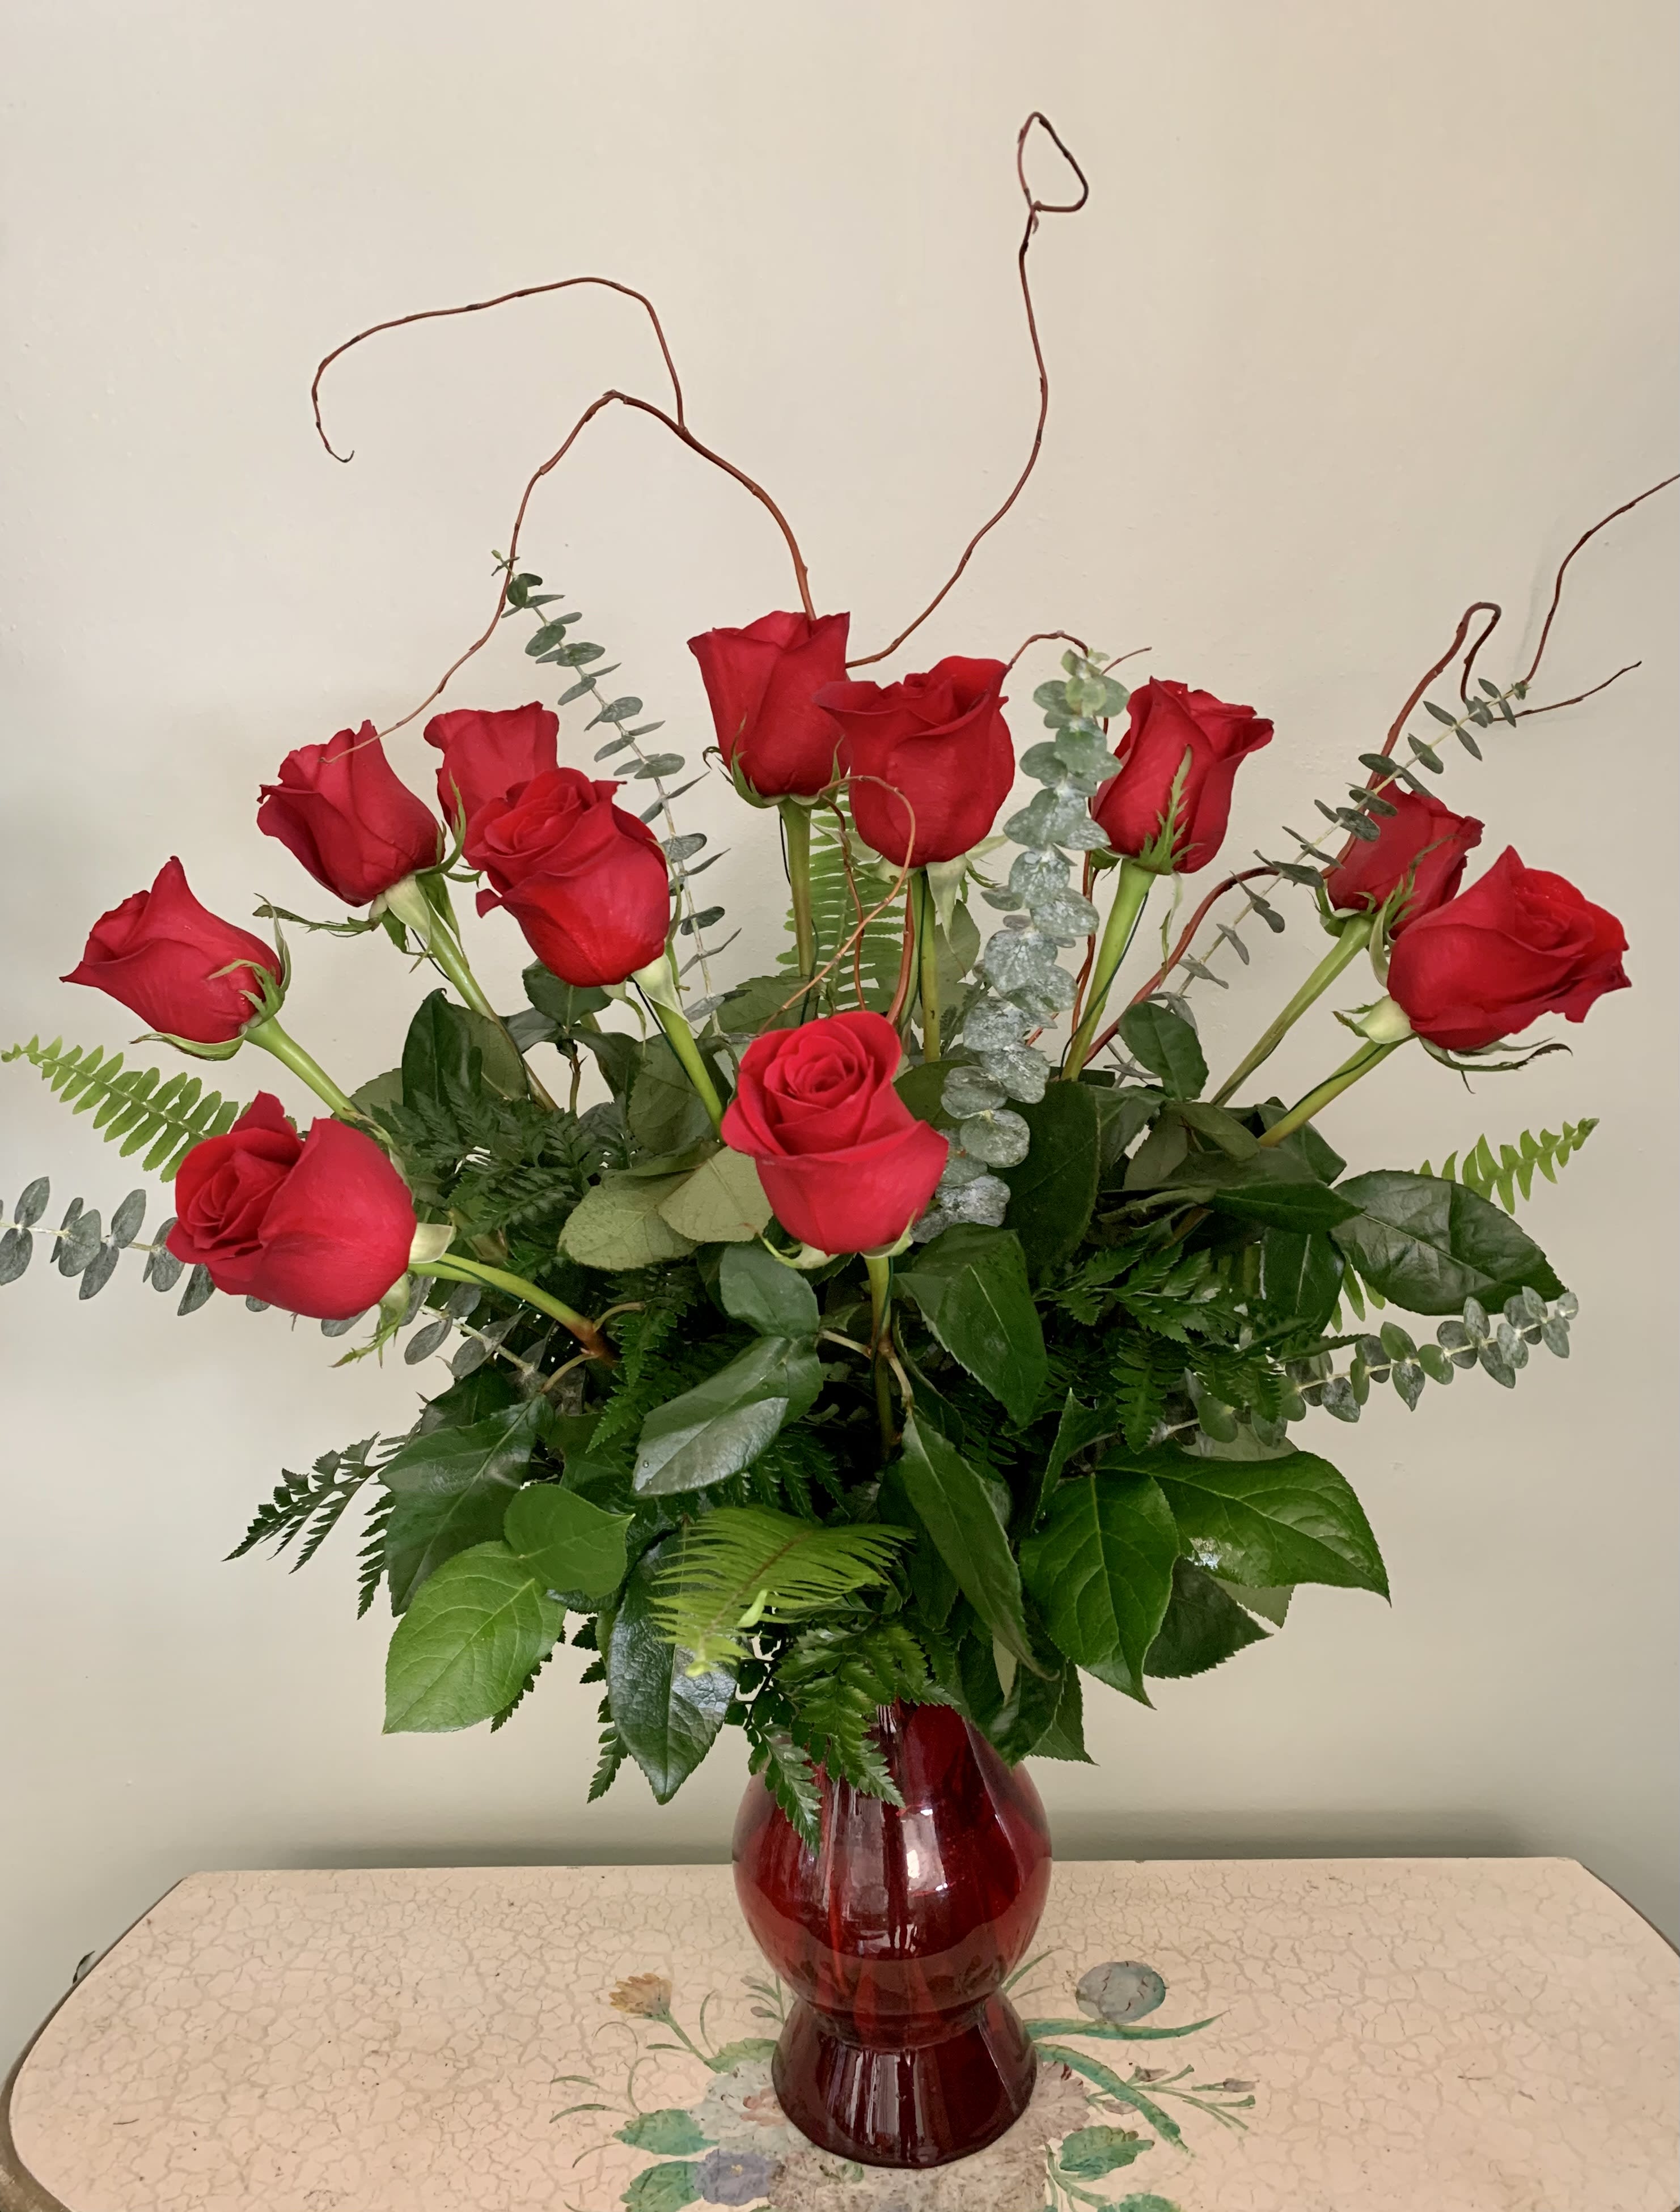 Premium Dozen Roses w/Upgraded Vase - Our most premium, long stem red roses with a stunning red vase, upgraded greenery and curly willow.   